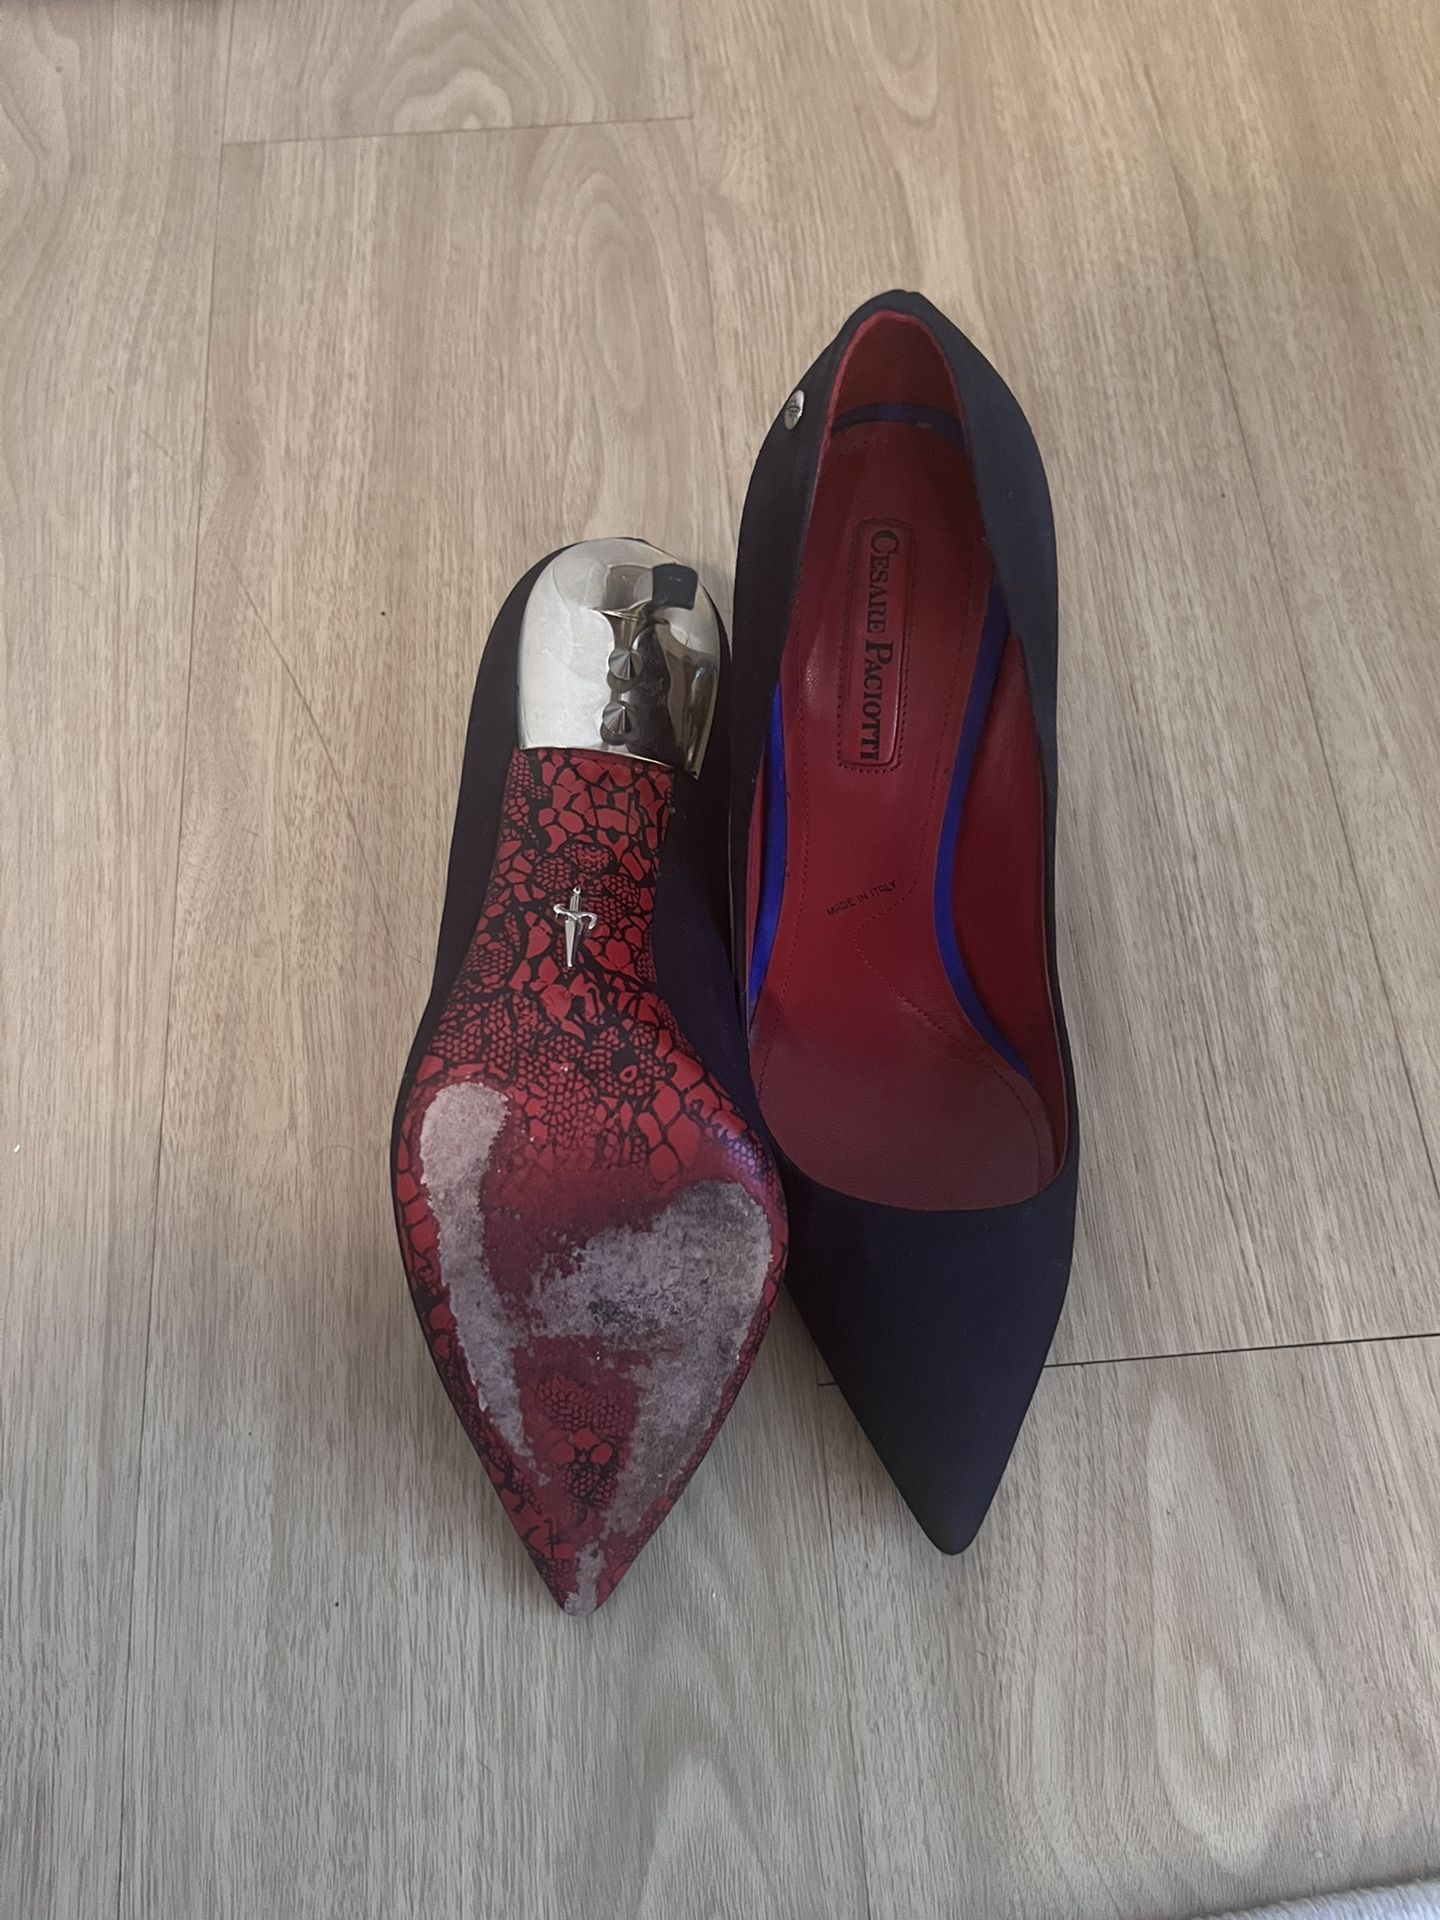 Cesare paciotti Red Bottoms Shoes 